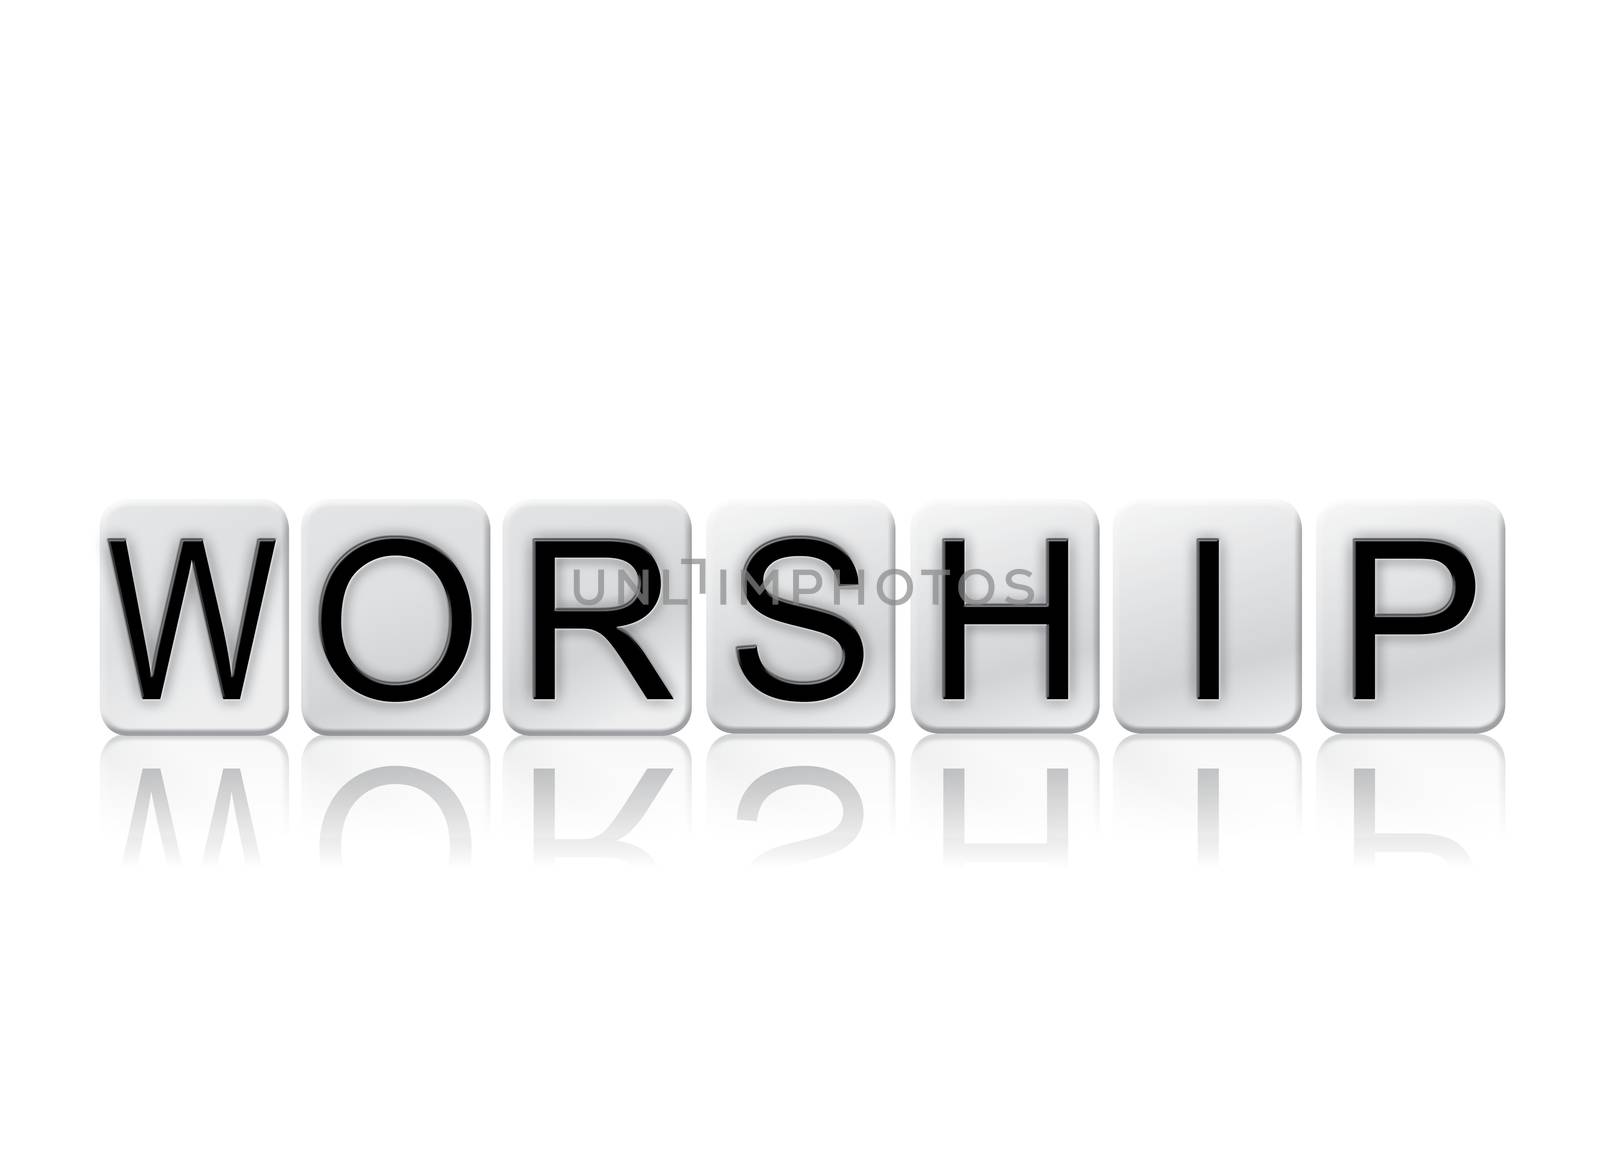 The word "Worship" written in tile letters isolated on a white background.